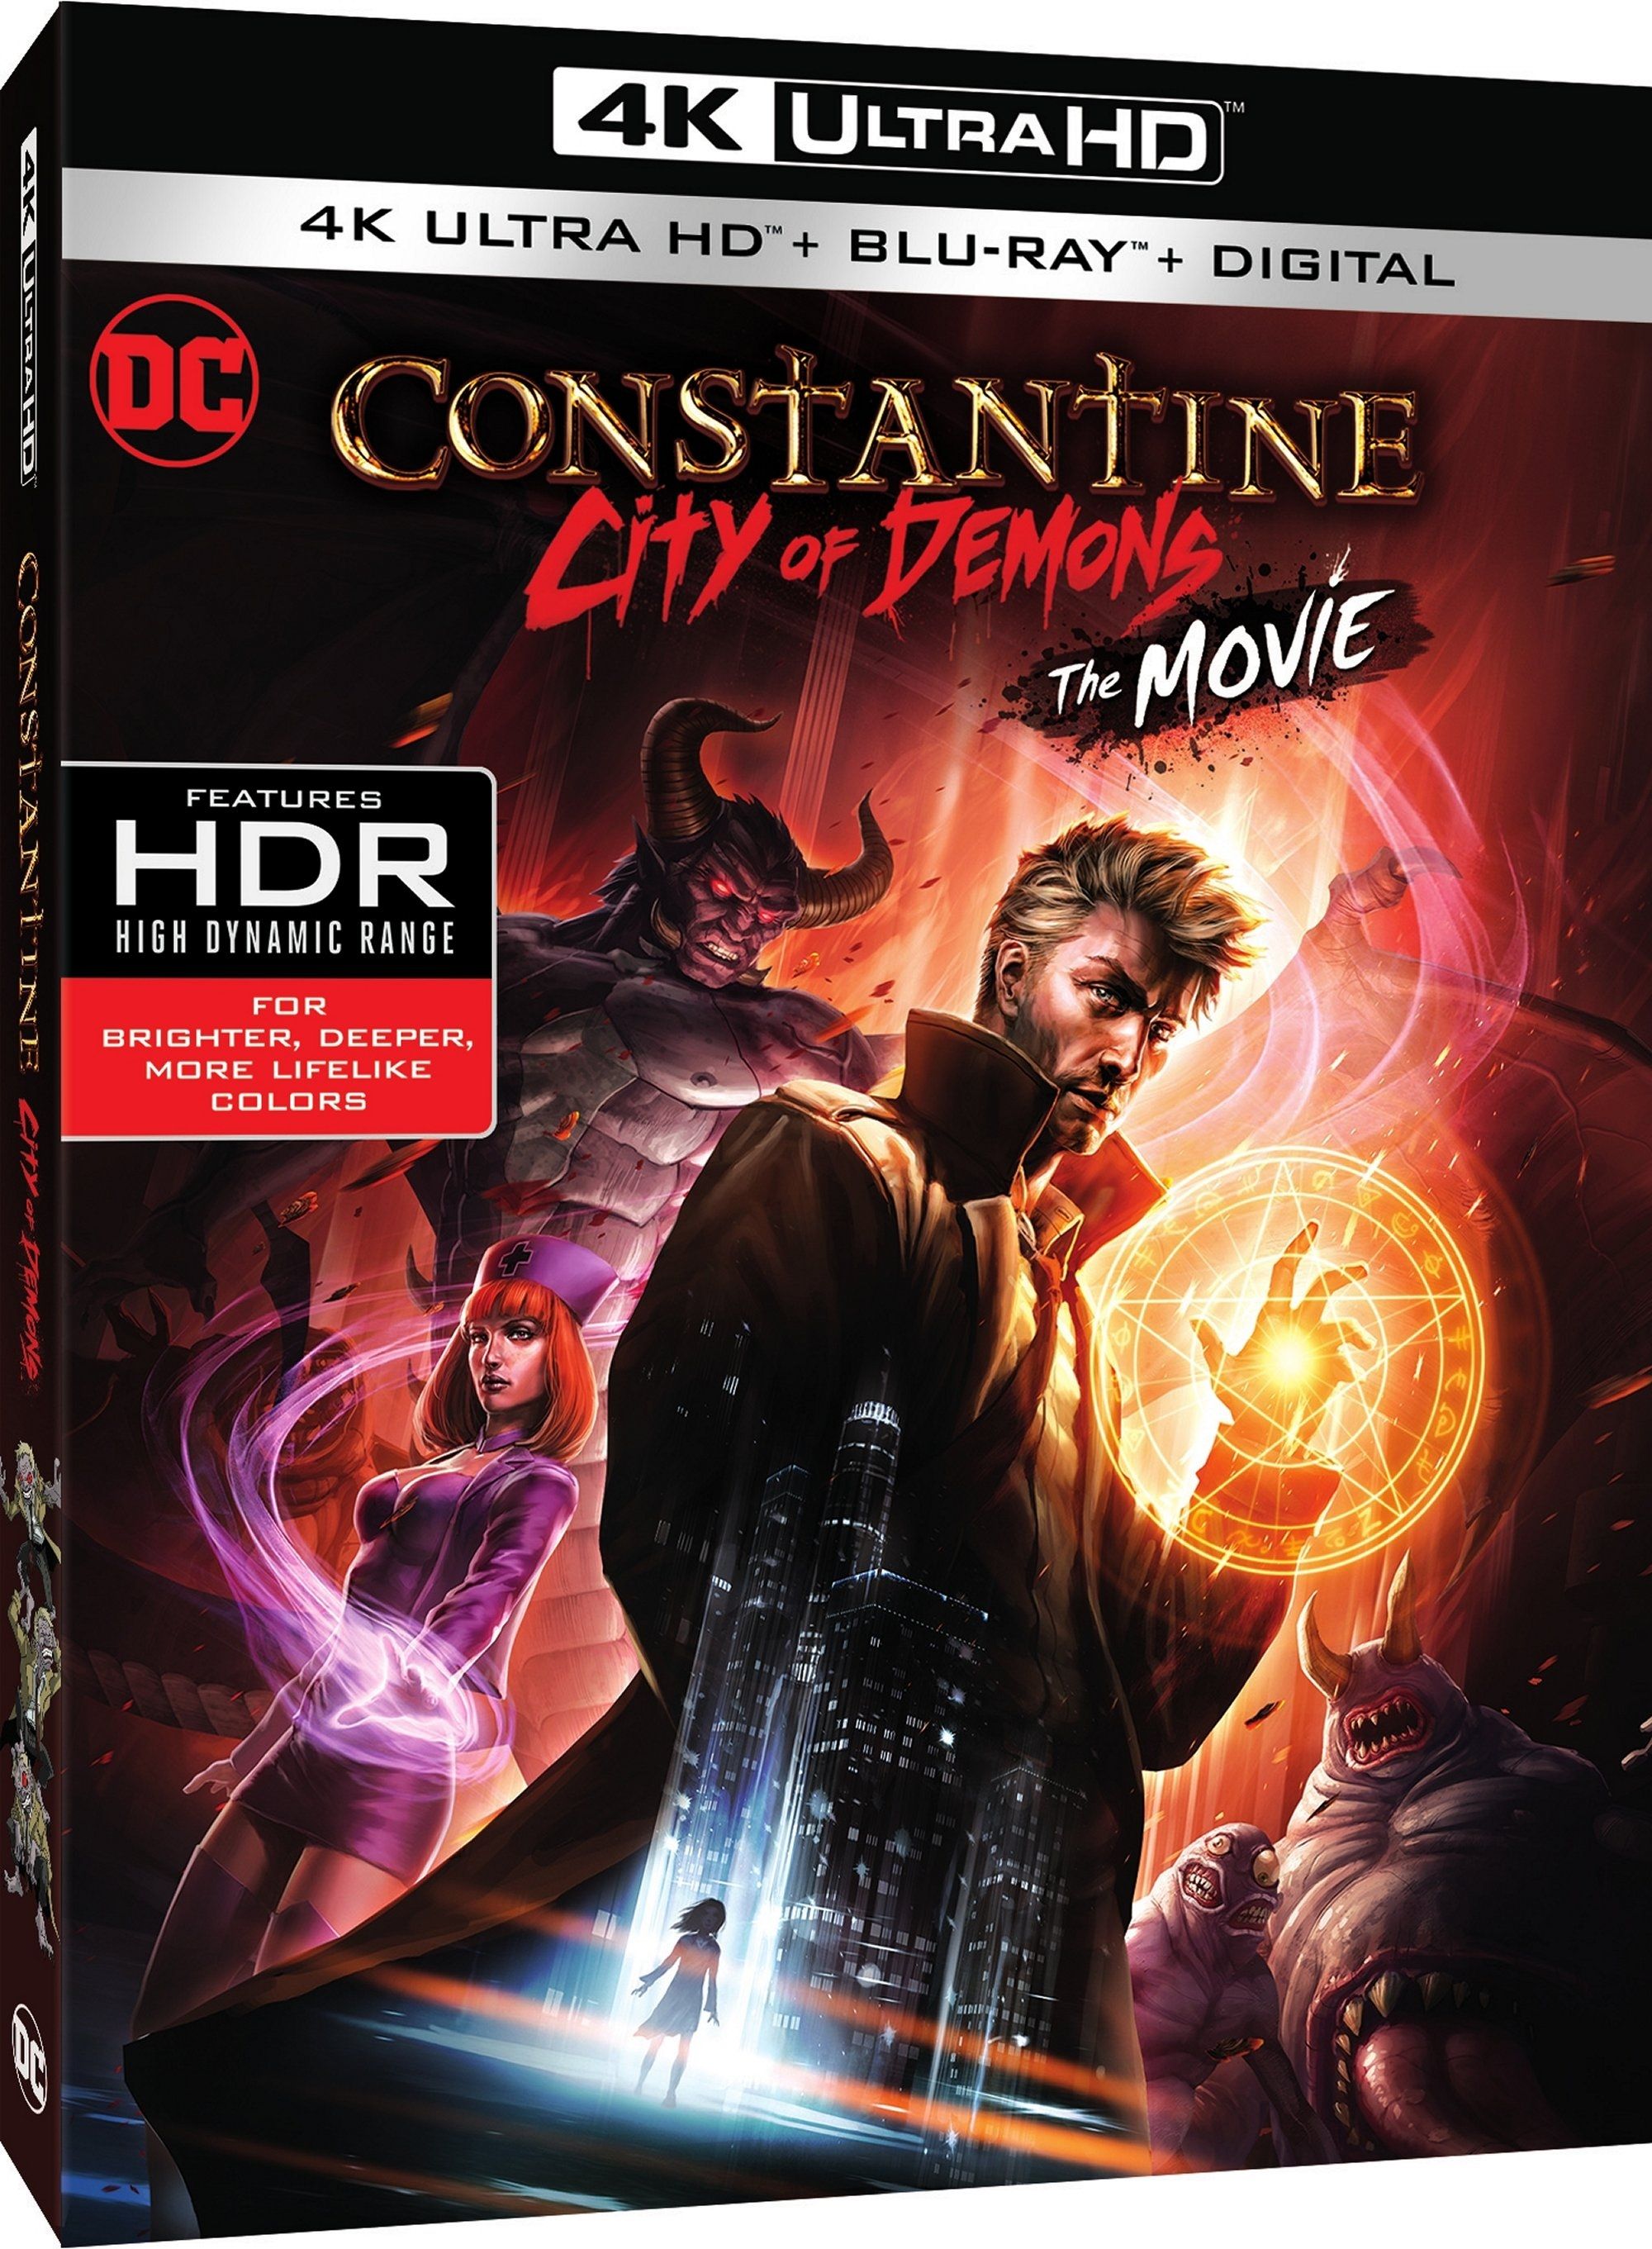 Constantine: City of Demons DVD cover